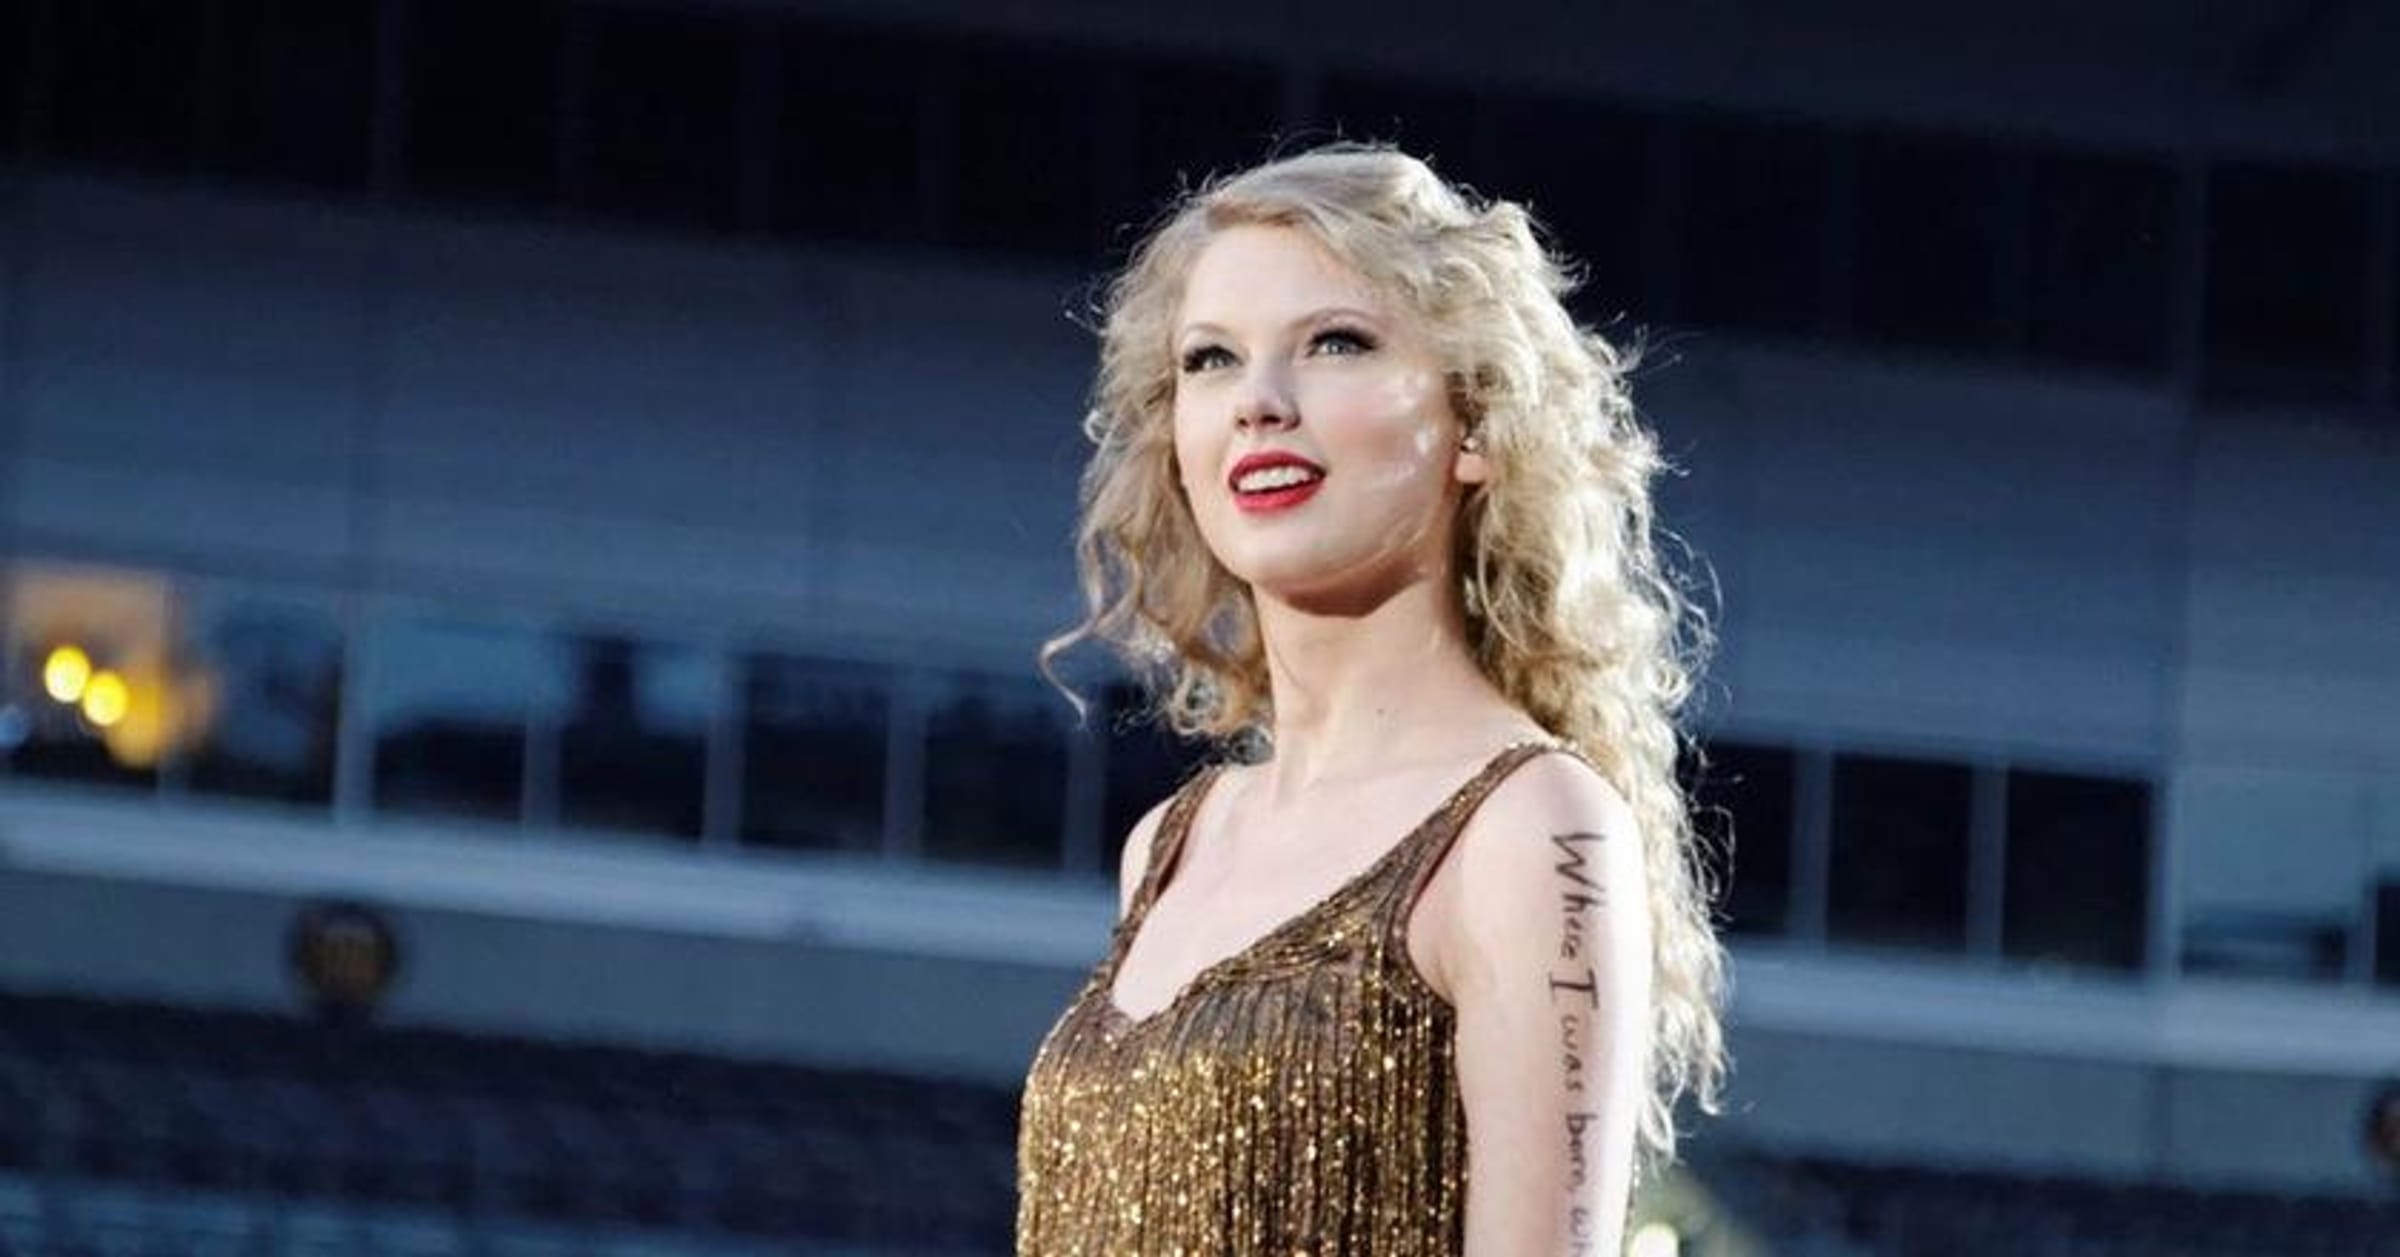 Taylor Swift fan receives vinyl with 'creepy' music instead of